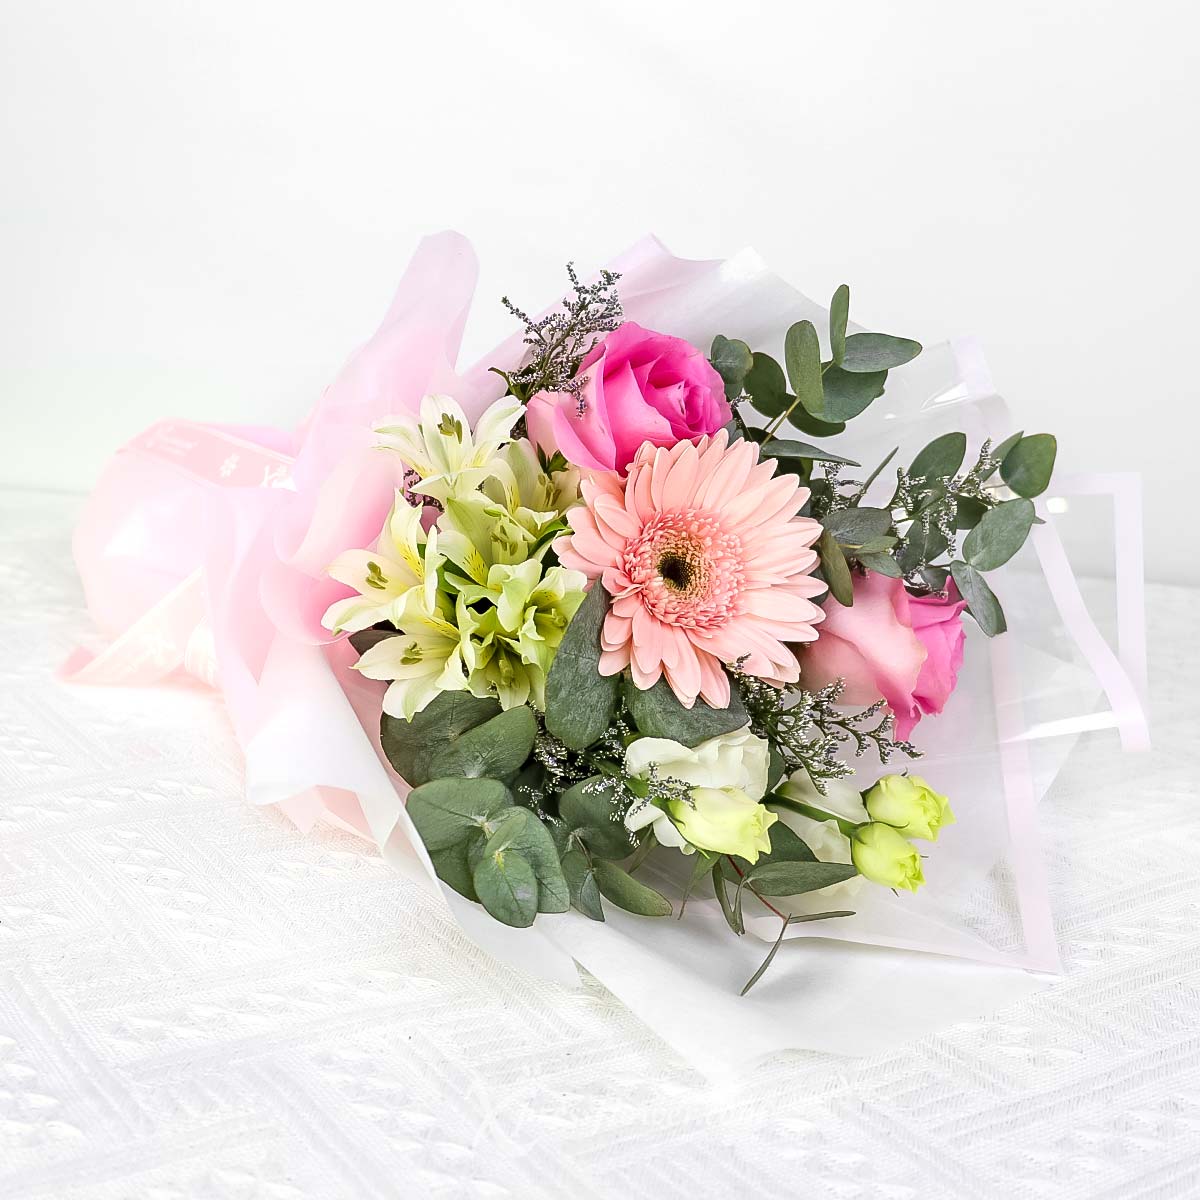 SBL2306 Wholesome Sentiment (Pink Roses & Gerbera with EYS Bird’s Nest) 1c